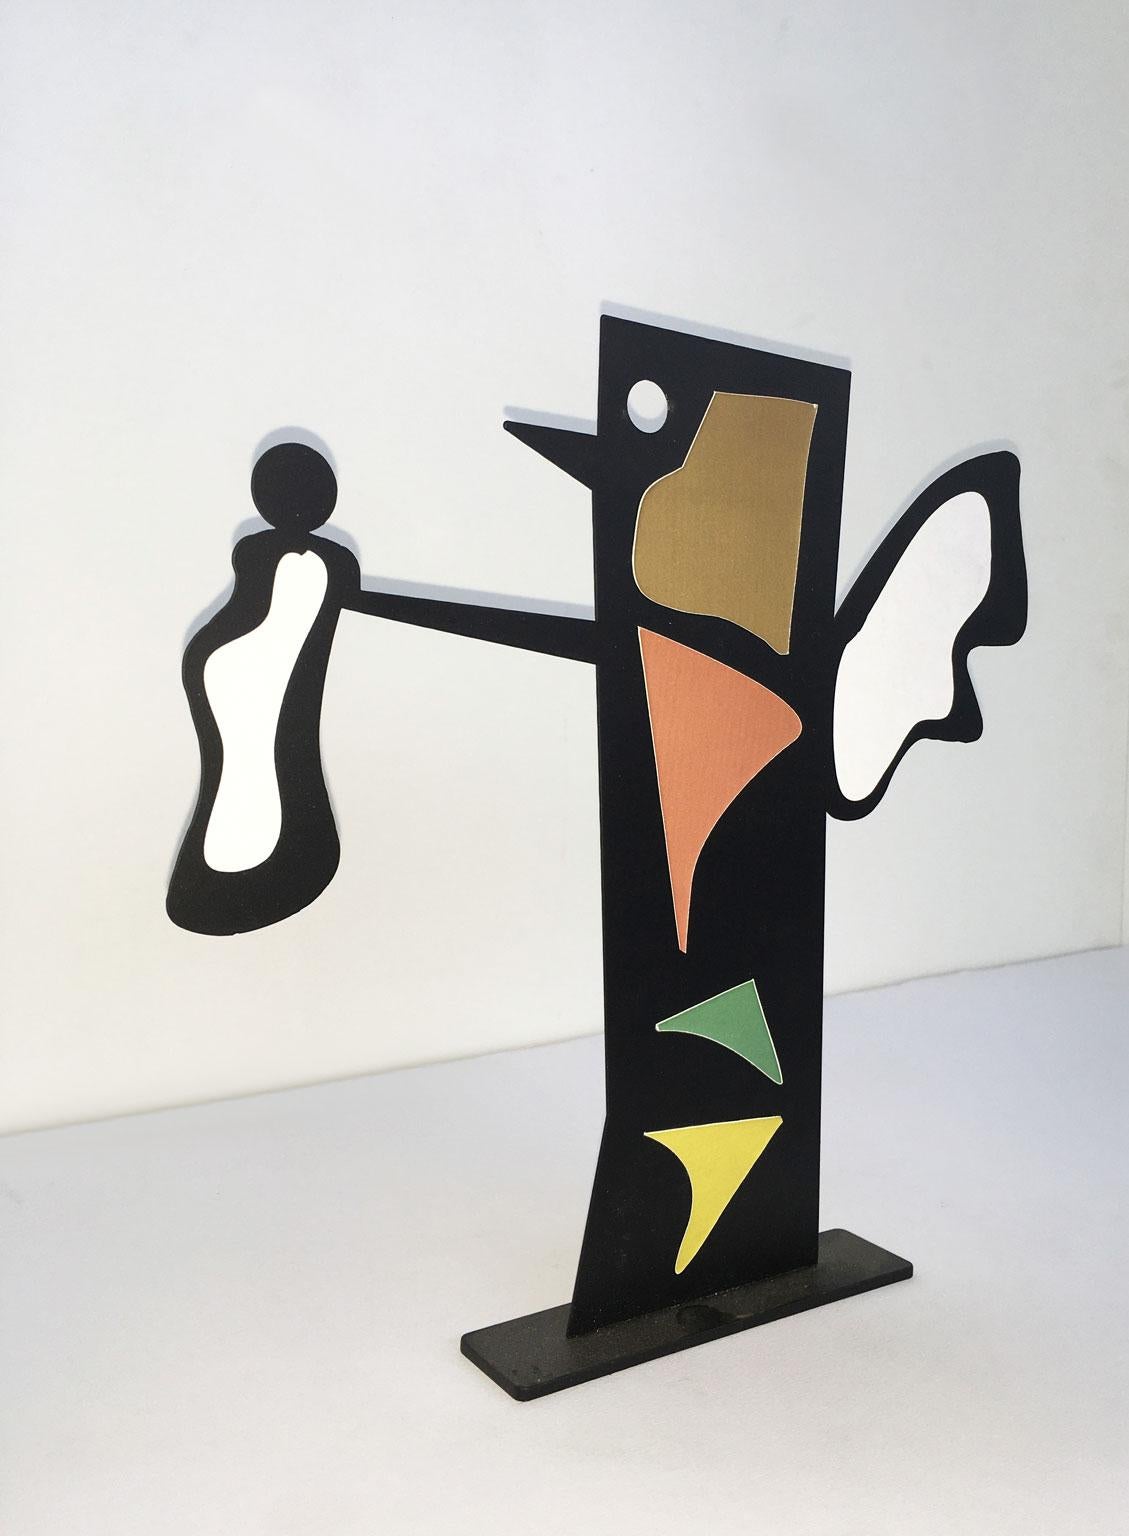 Italy 1980 Riccardo Dalisi Black Metal Painted Sculpture Caffellatte For Sale 13